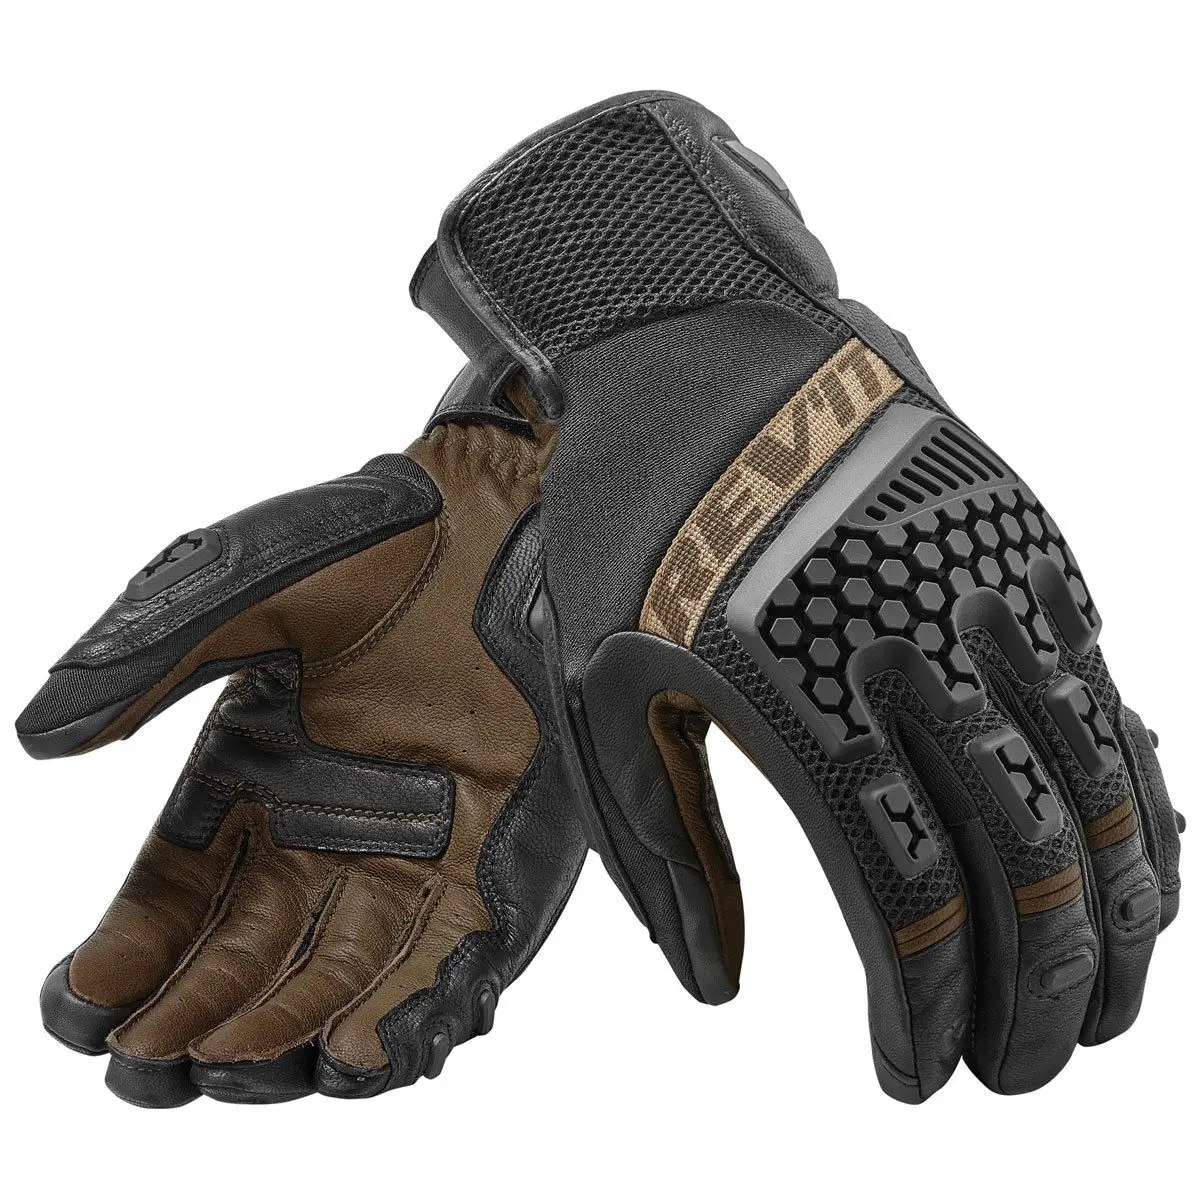 New Revit Sand 3 Trial Motorcycle Adventure Touring Ventilated Gloves Ge... - $47.04+